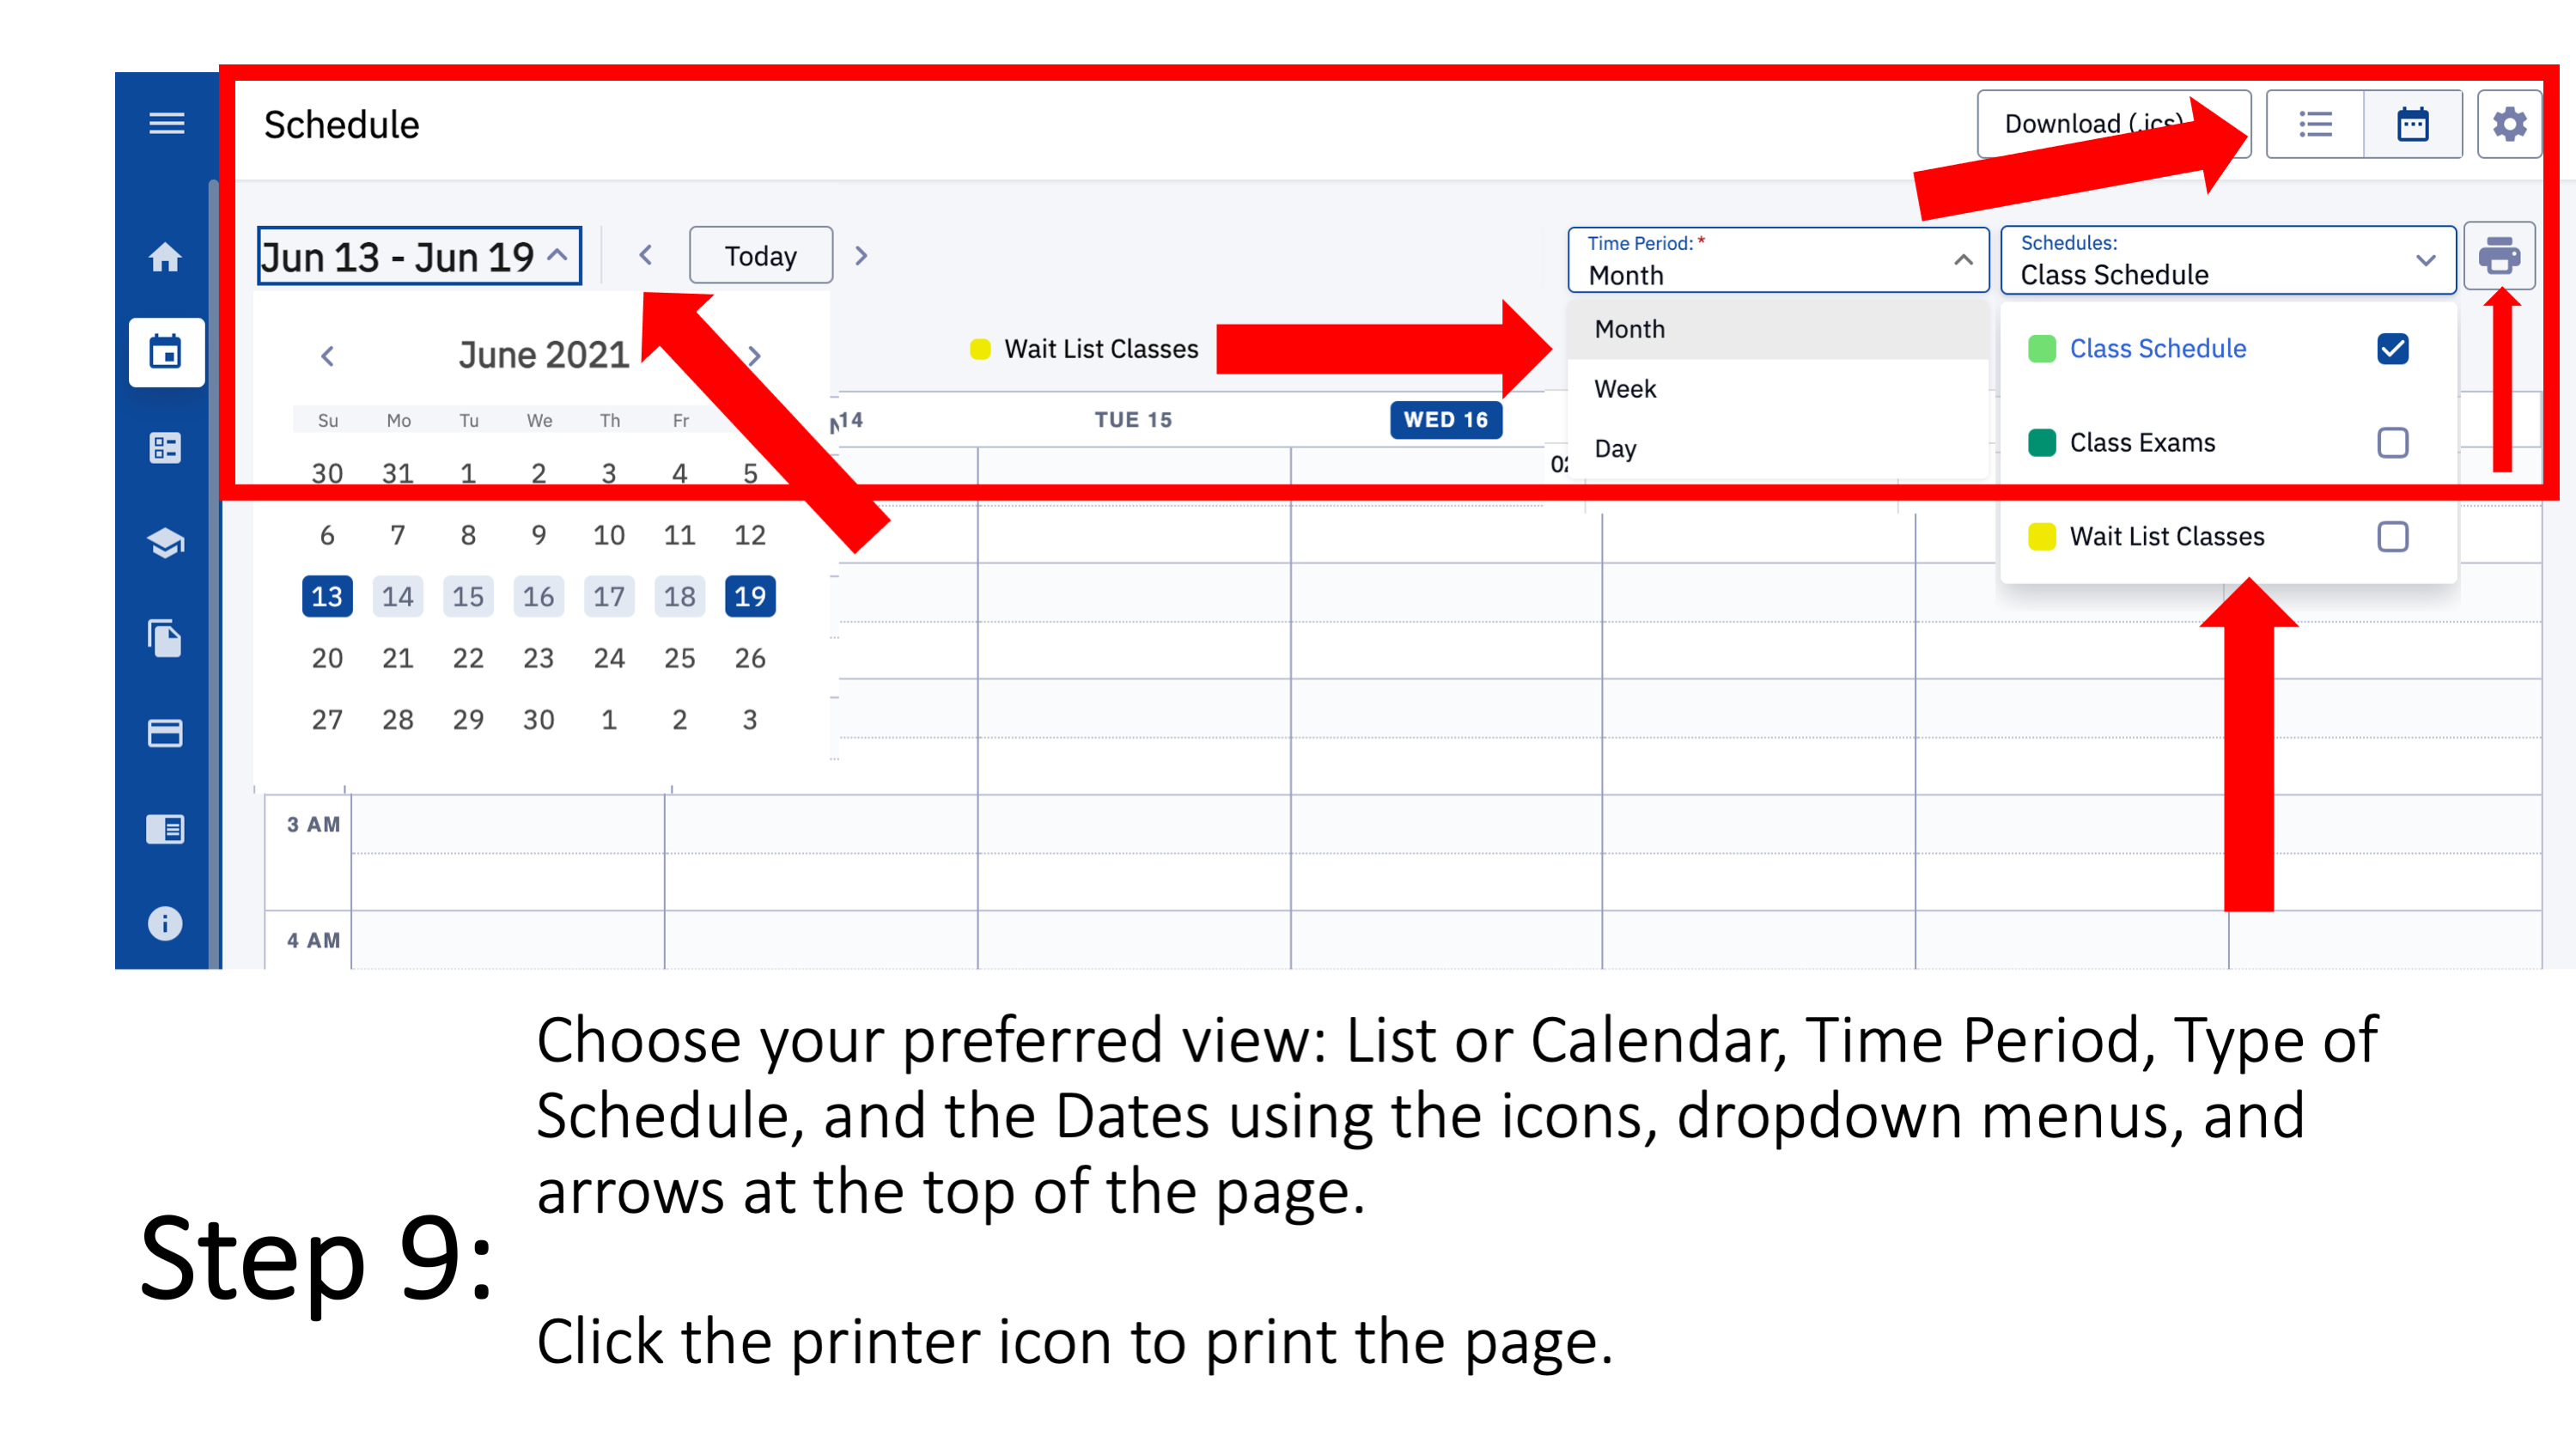 Step 9: Choose your preferred view: List or Calendar, Time Period, Type of Schedule, and the Dates using the icons, dropdown menus, and arrows at the top of the page. Click the printer icon to print the page.